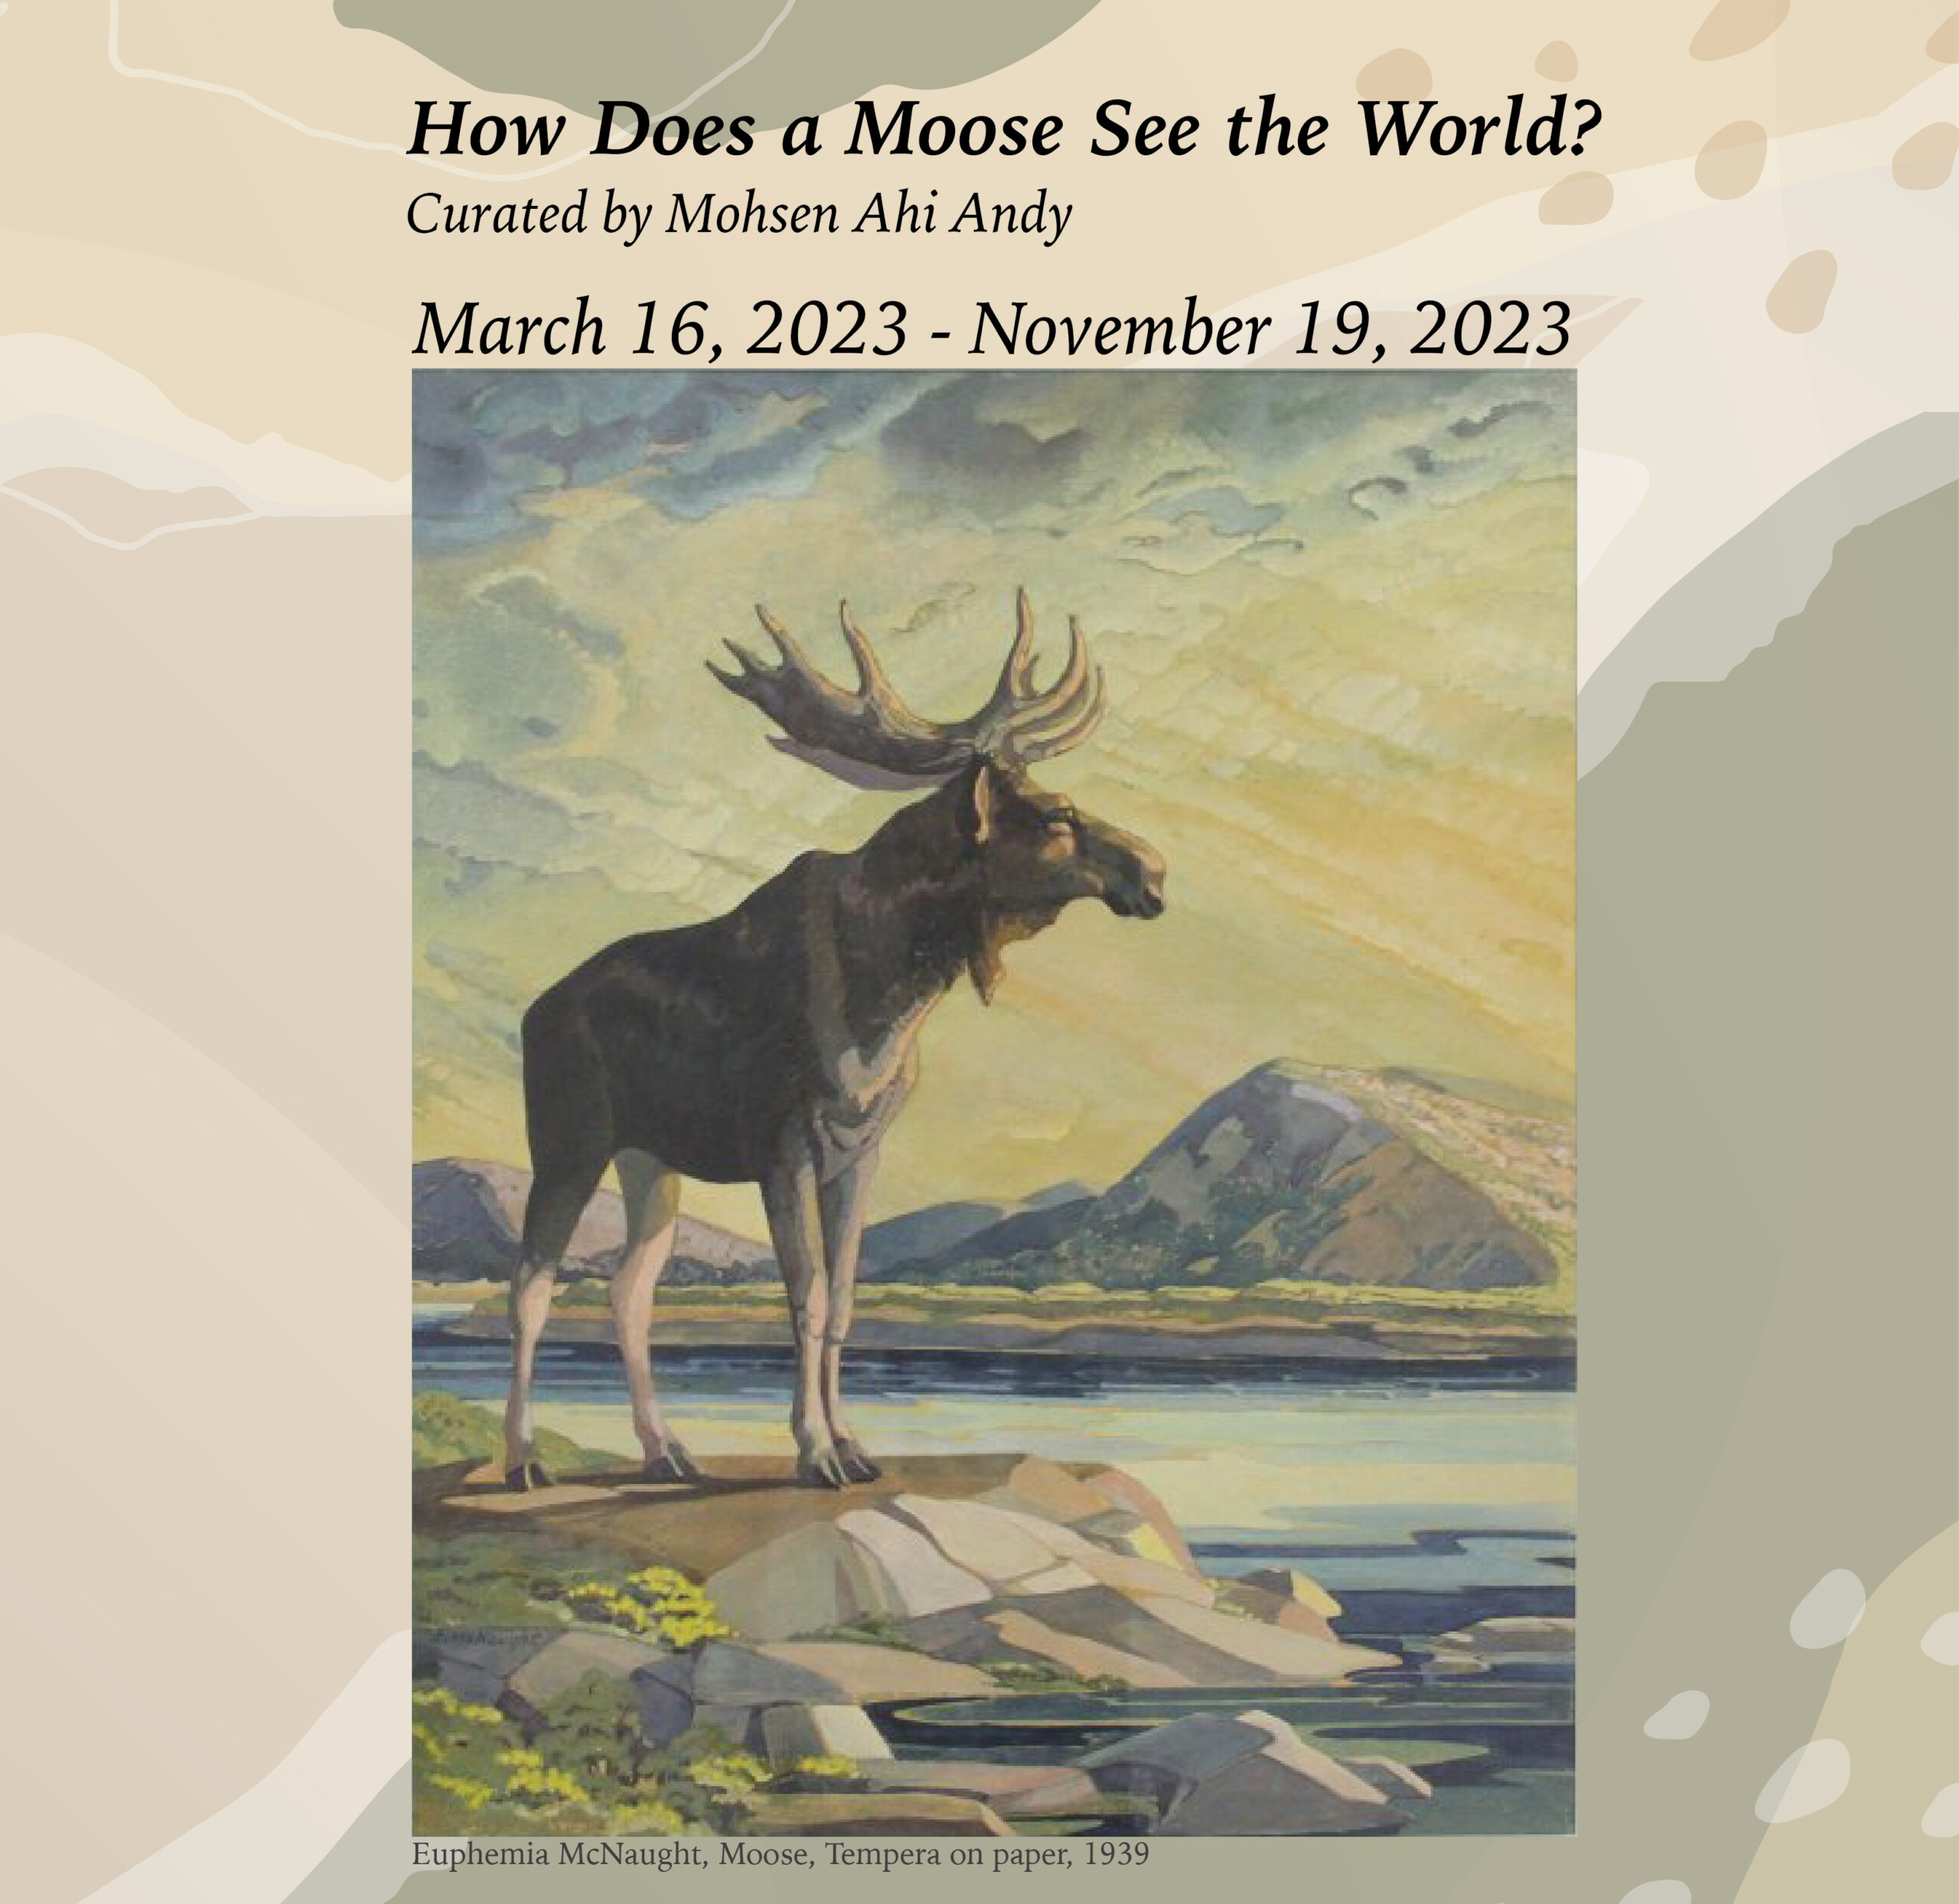 How Does a Moose See the World?